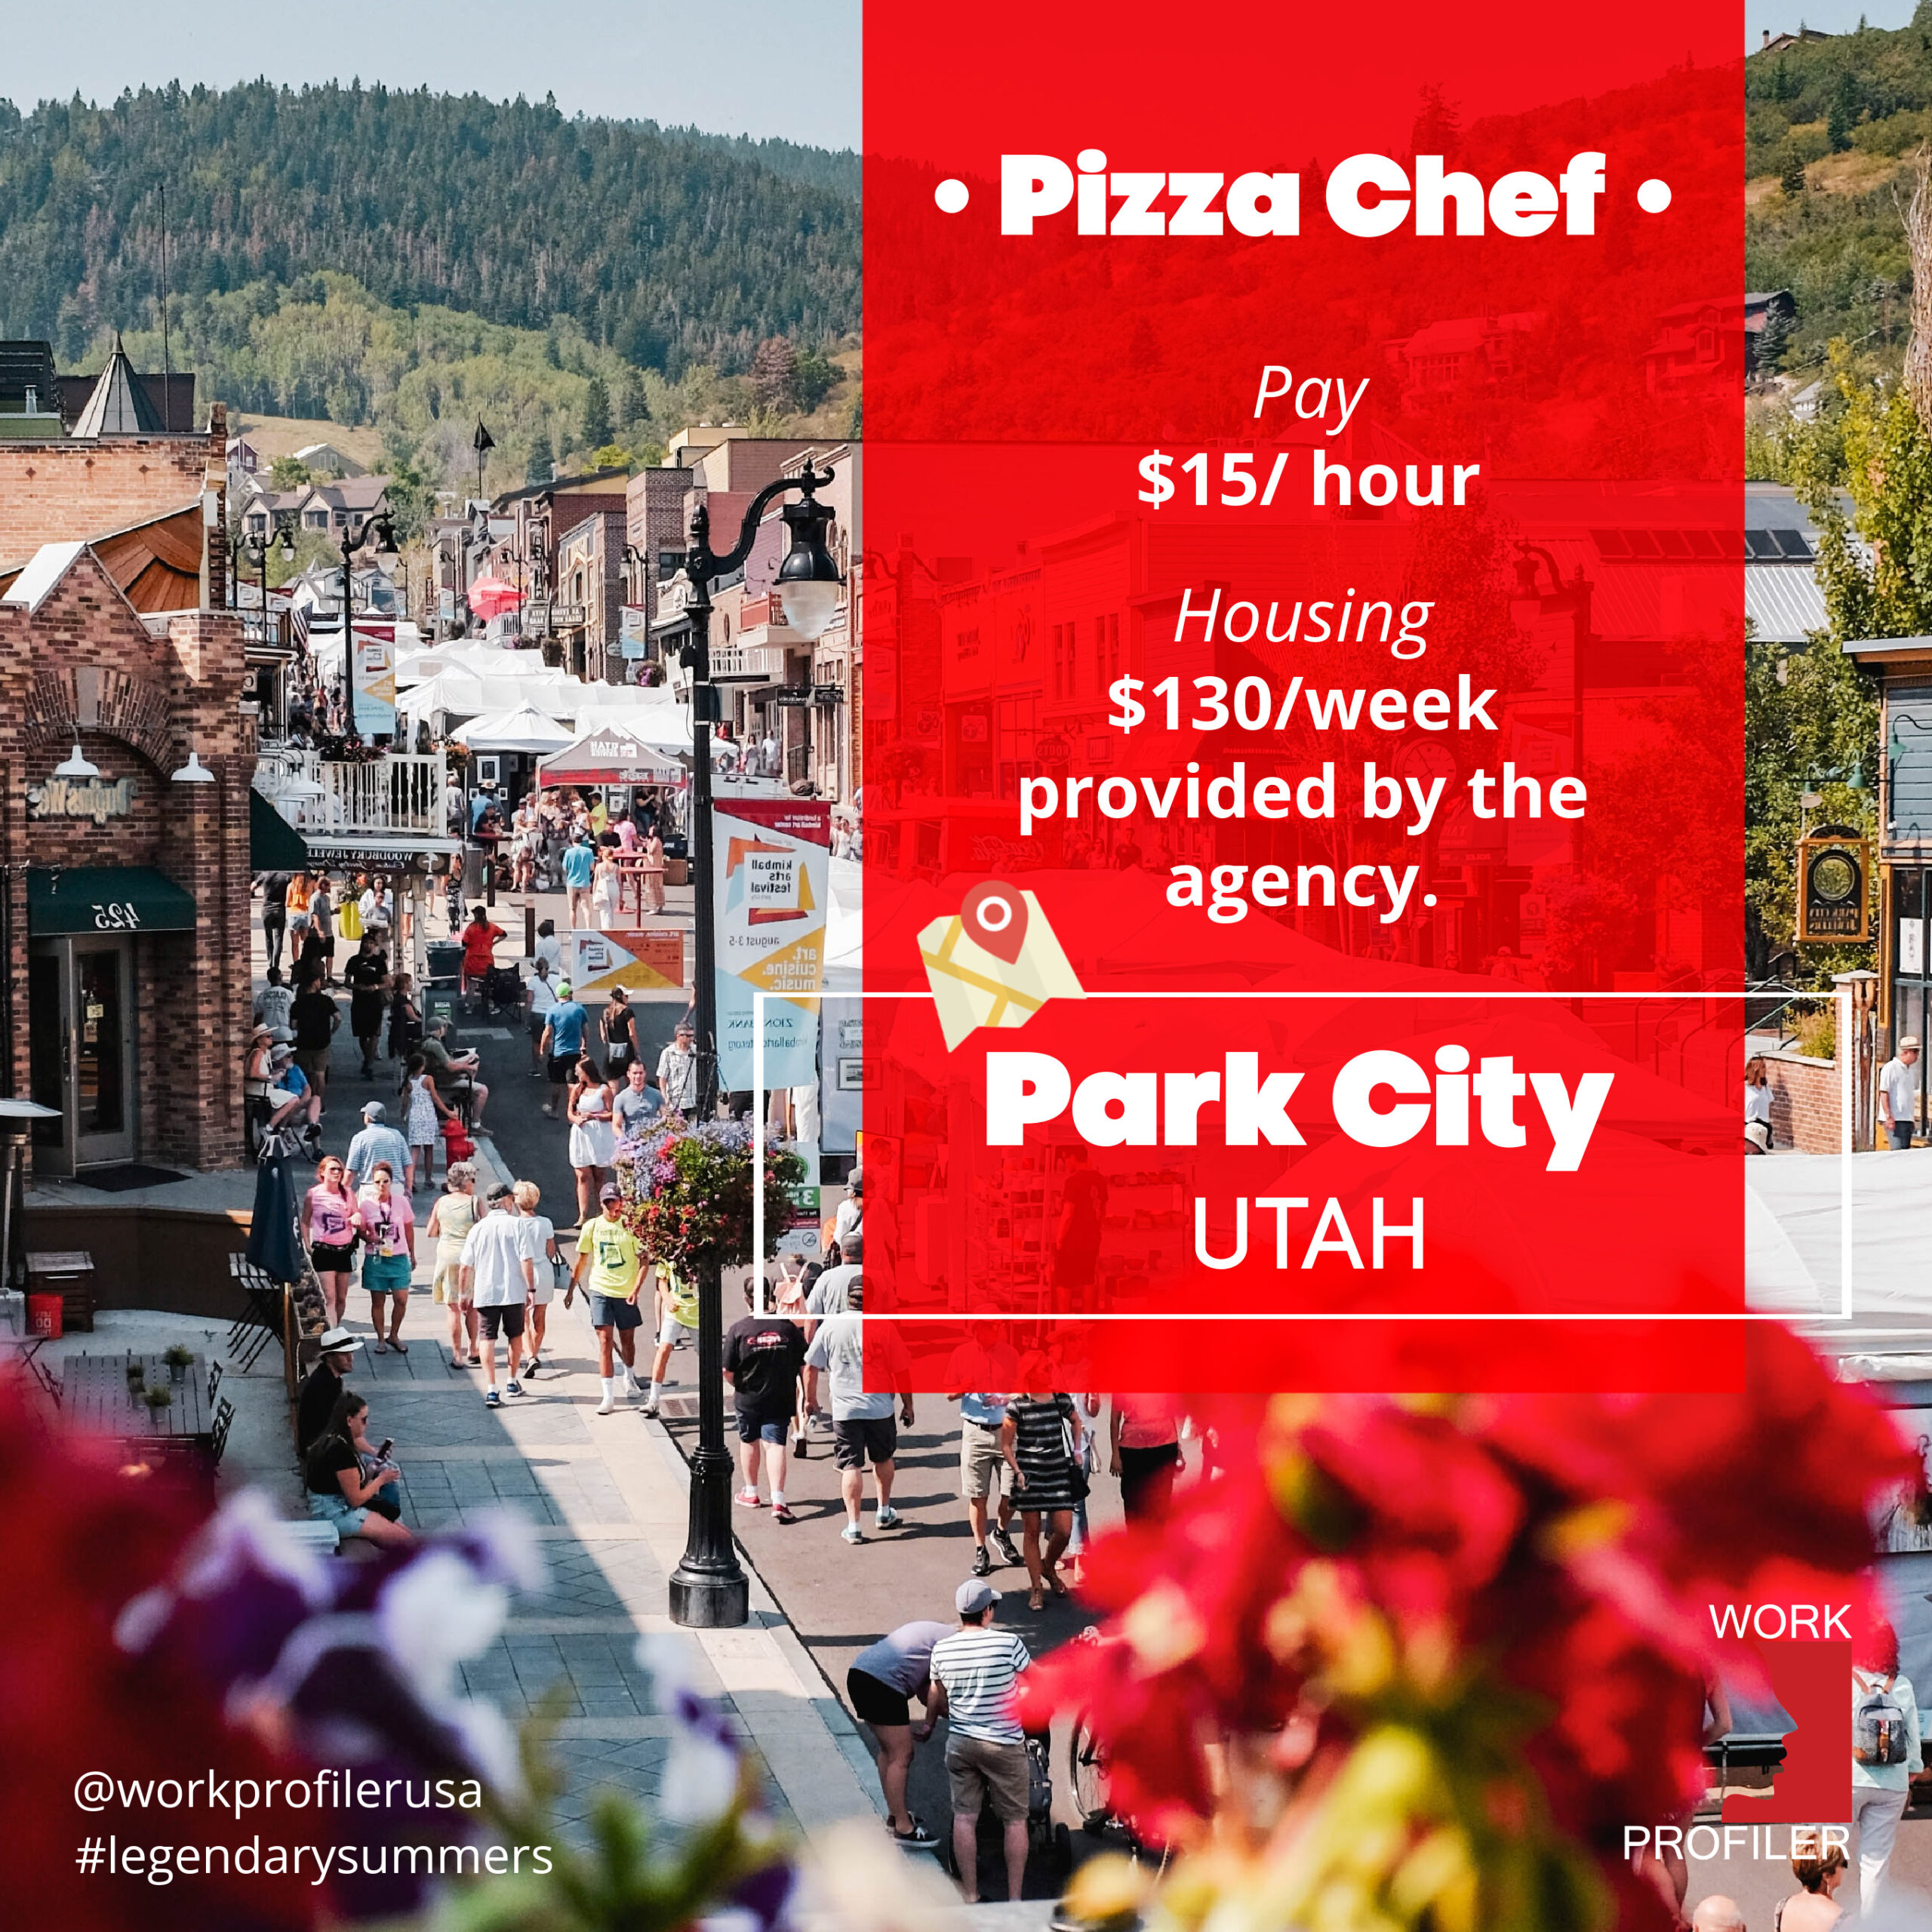 A job advertisement for pizza chef position, in Utah. The ad mentions pay of $15 per hour and housing provided by the employer.